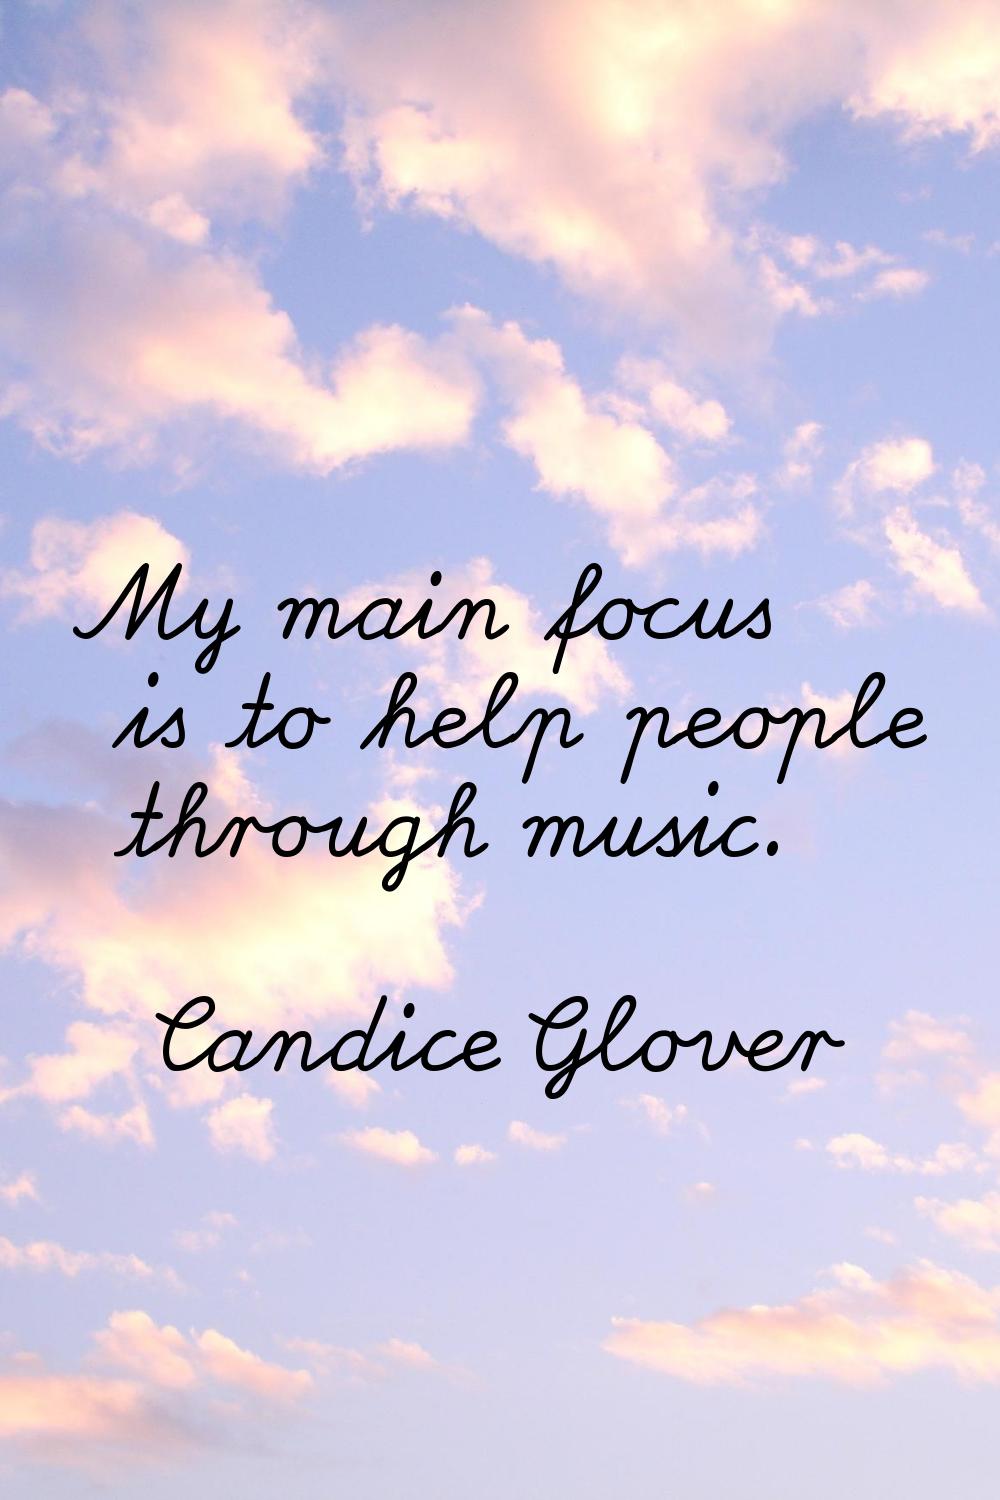 My main focus is to help people through music.